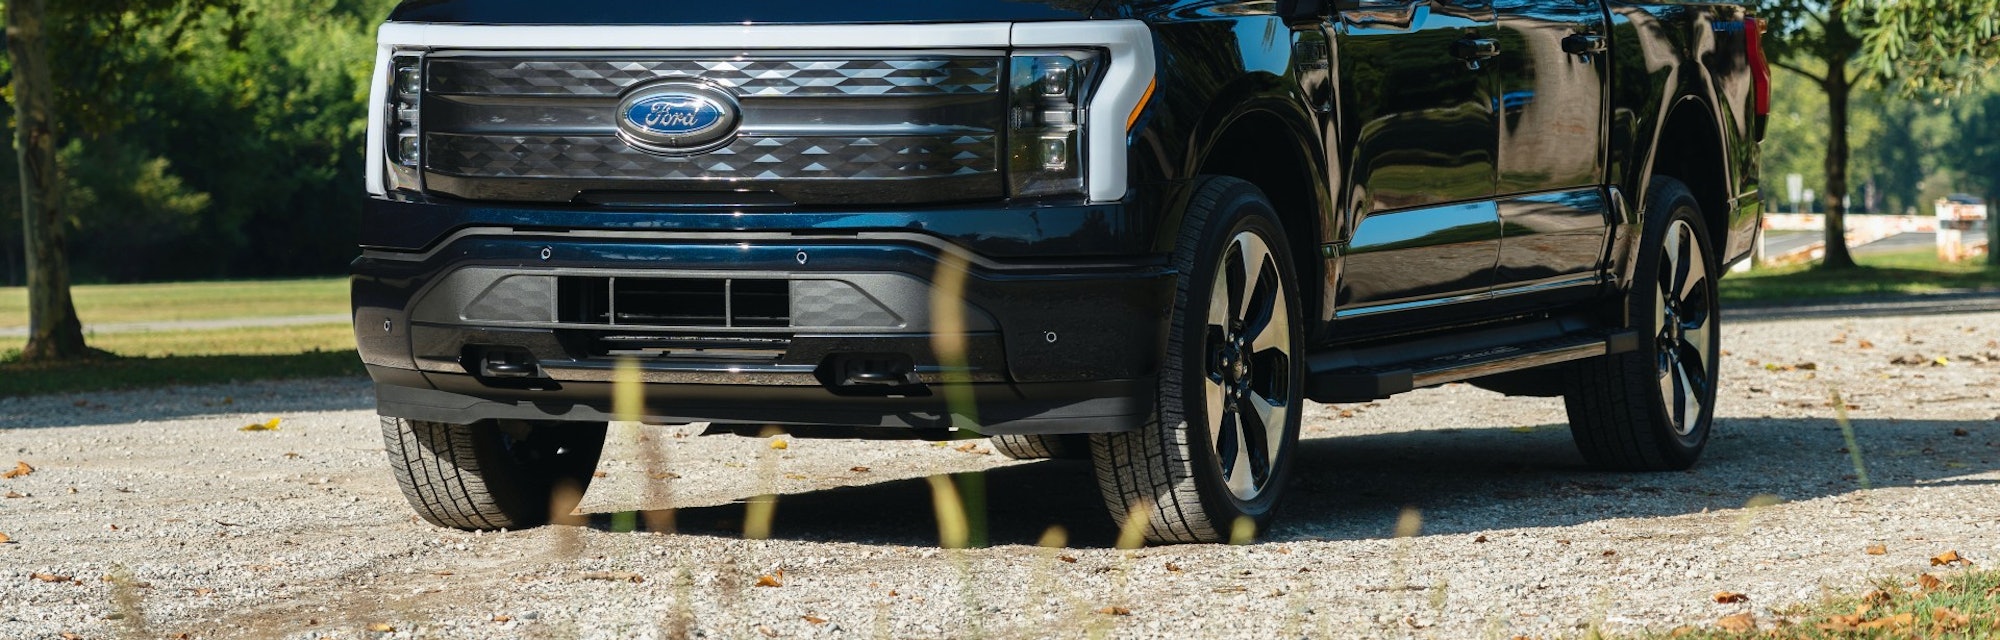 The electric Ford F-150 pickup truck